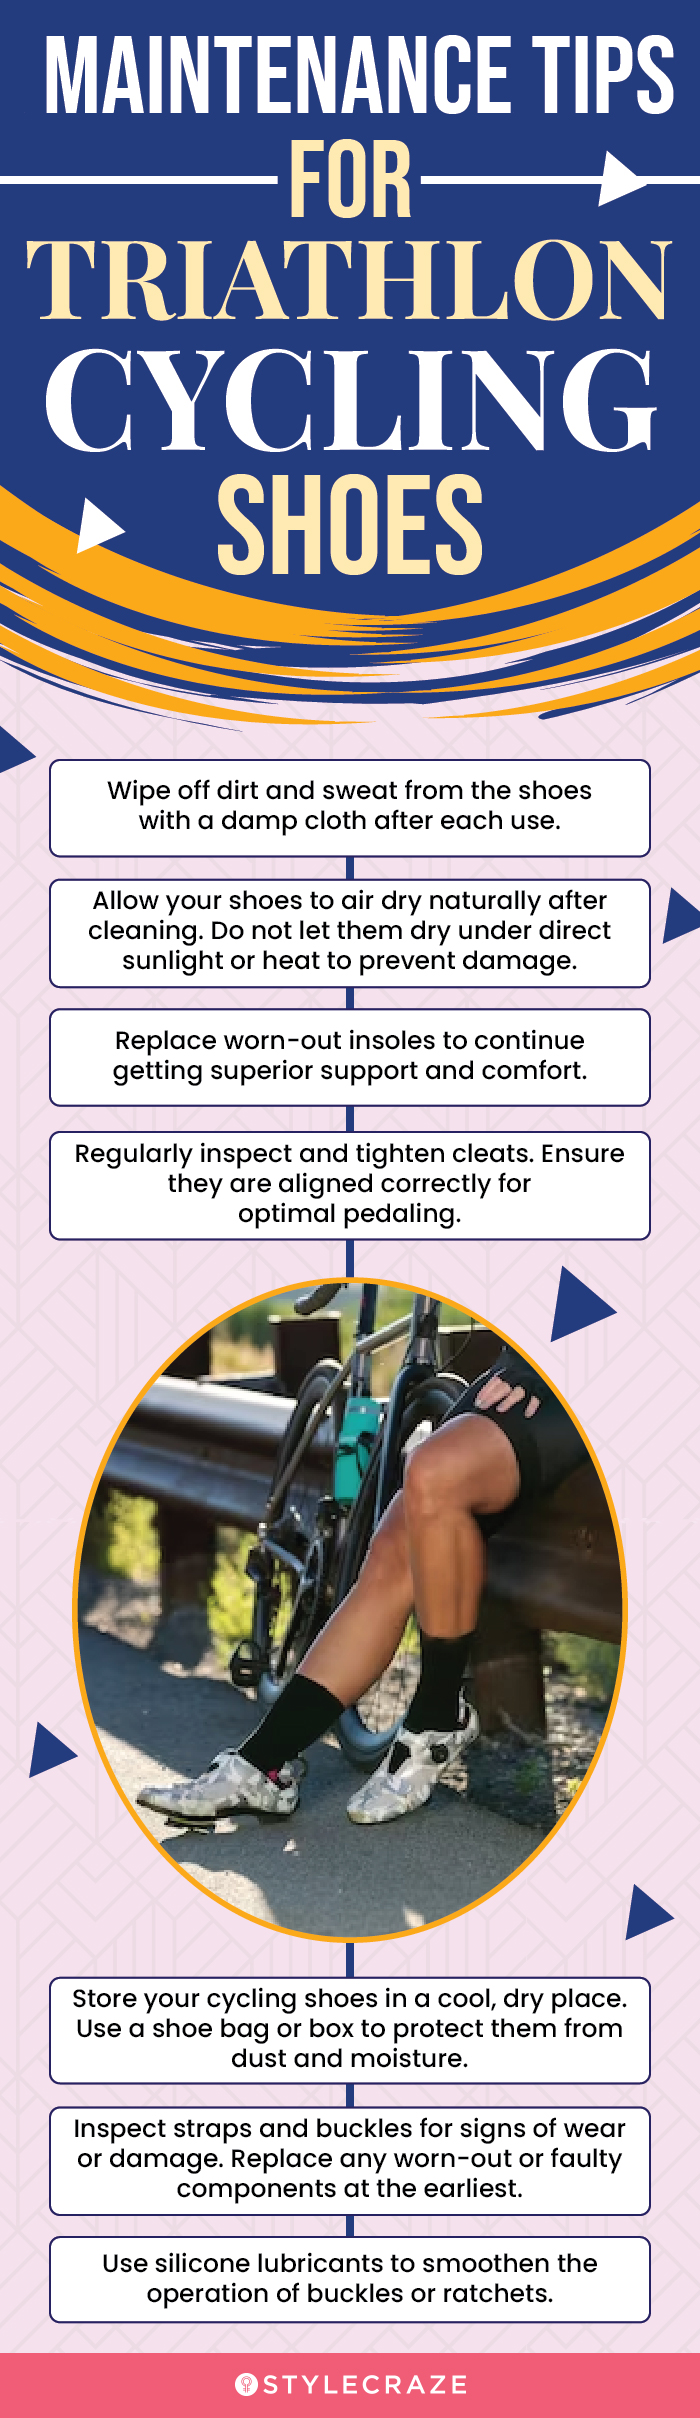 Maintenance Tips For Triathlon Cycling Shoes (infographic)